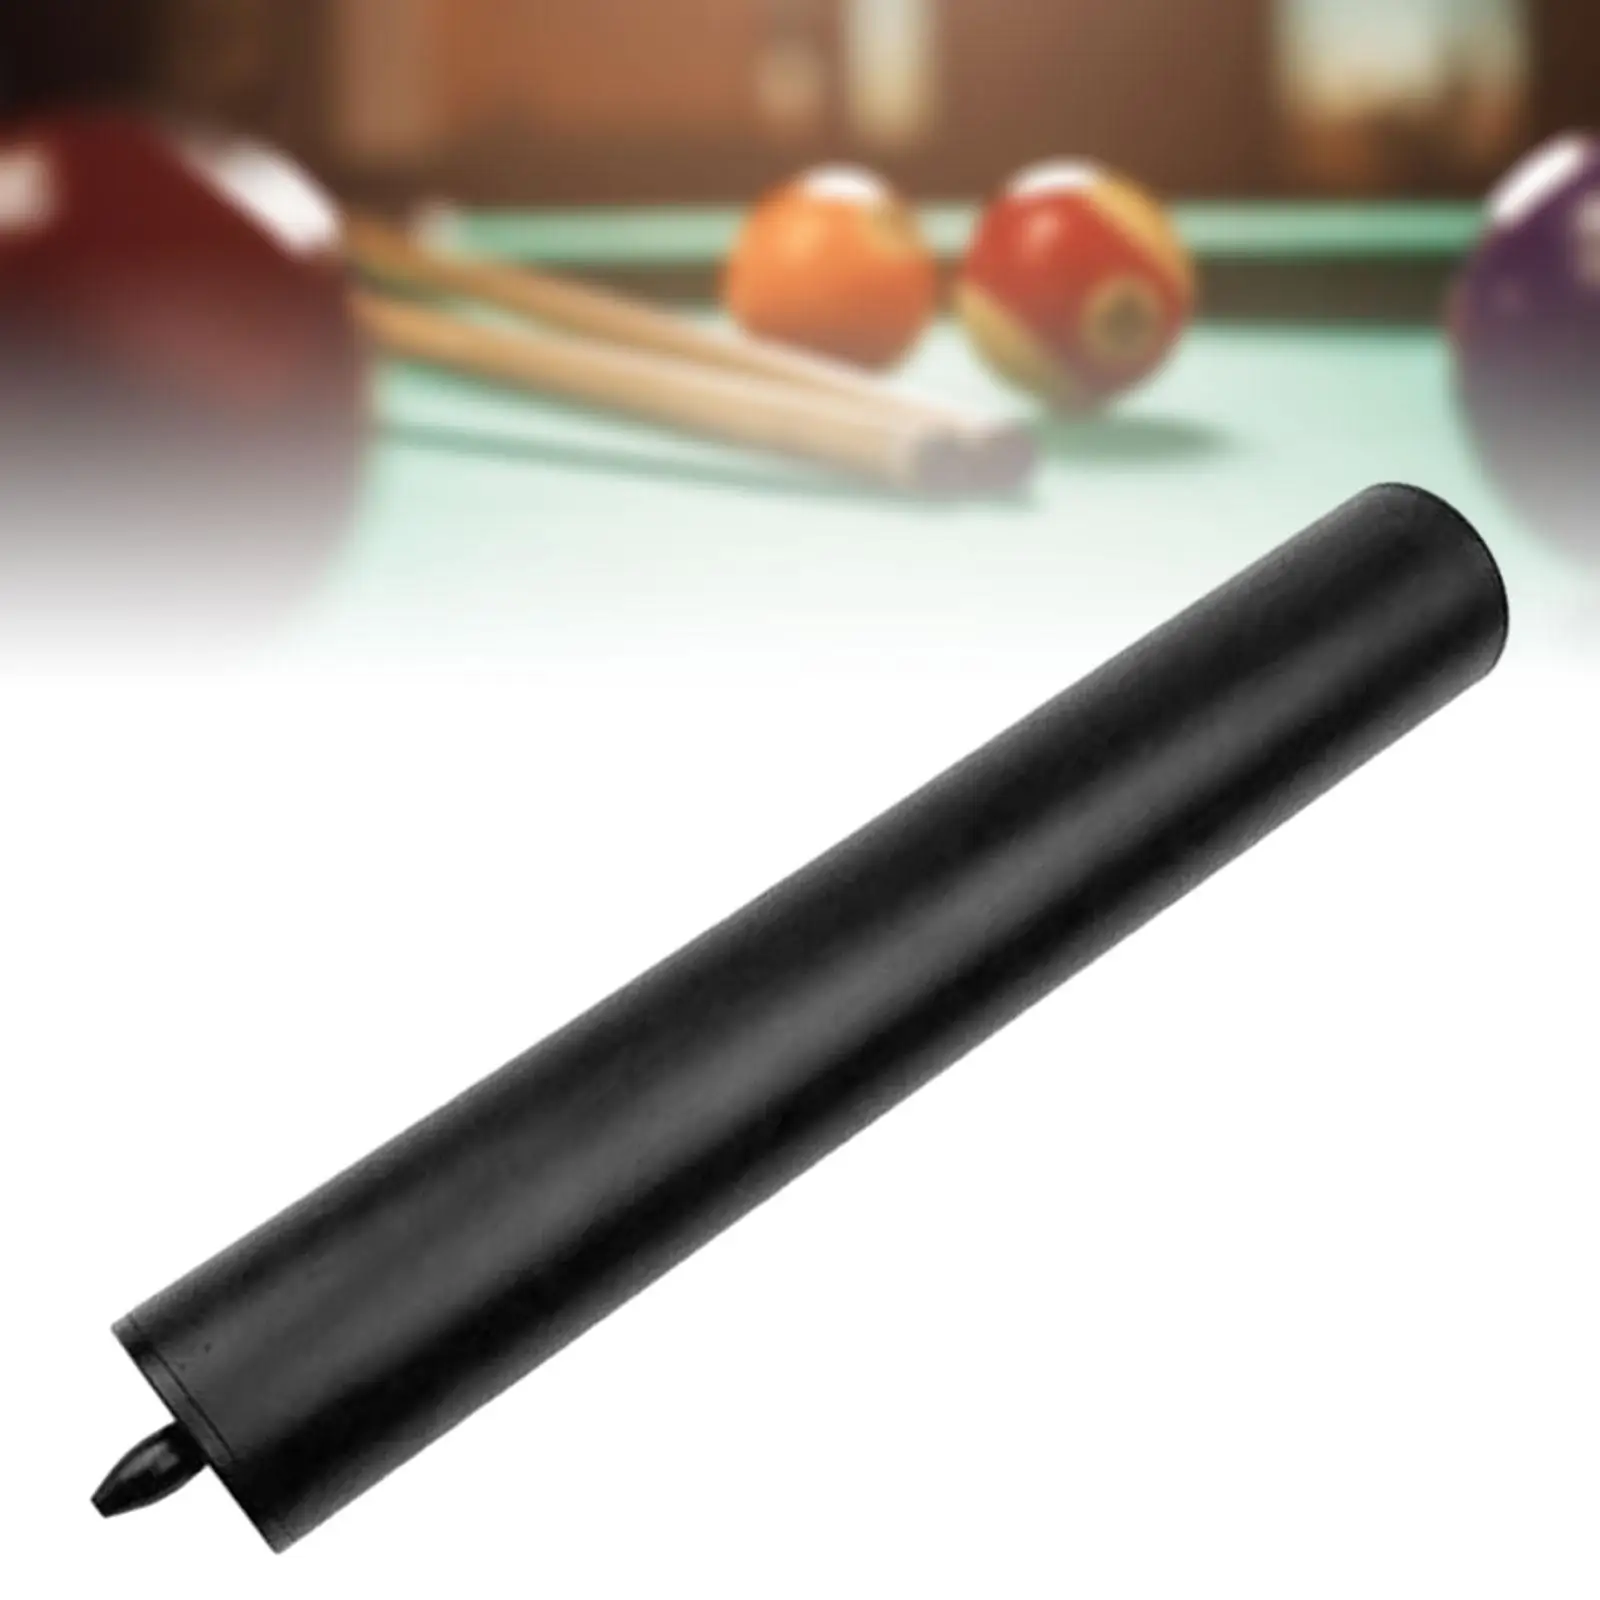 Pool Cue Extender Compact Billiard Holder Billiards Pool Cue Extension for Enthusiast Snooker Beginners Billiard Cues Accessory